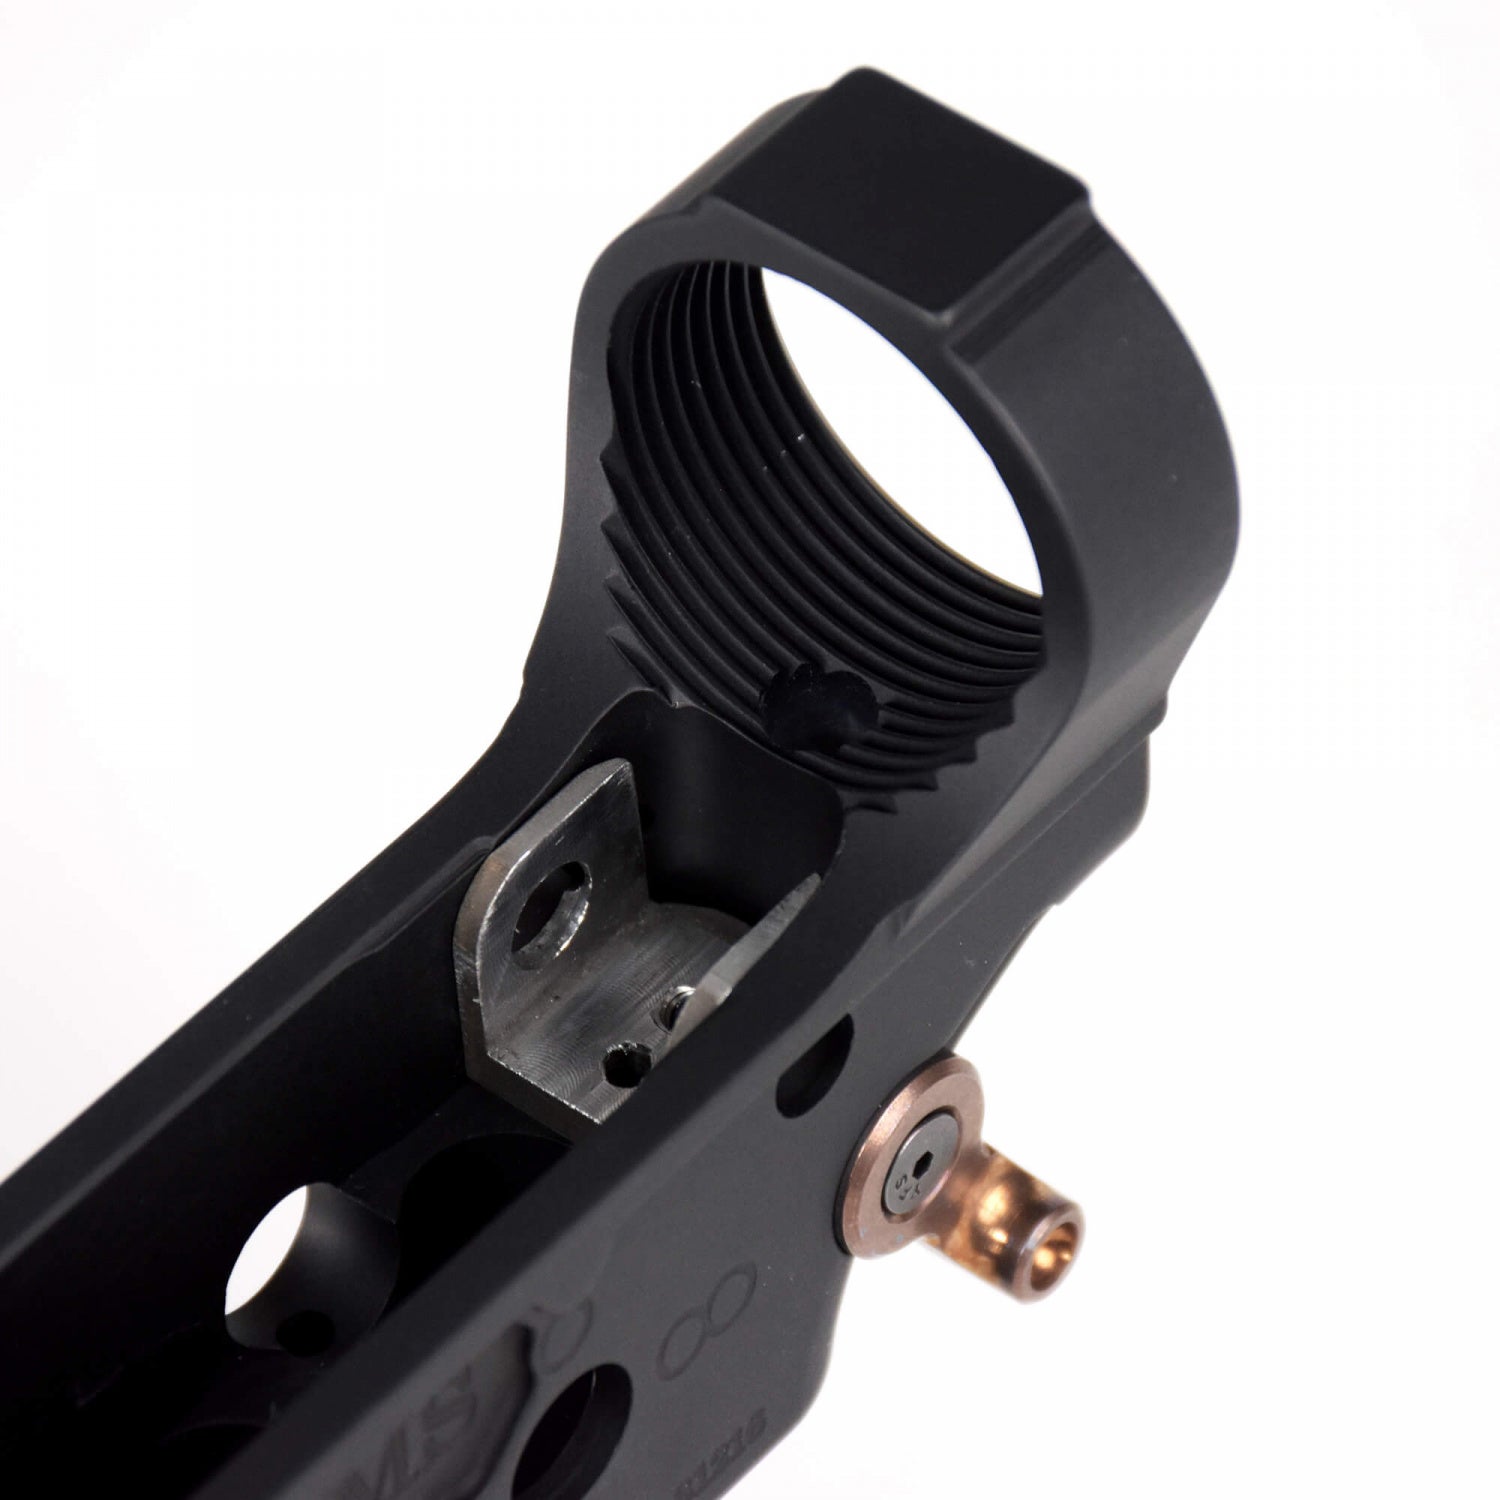 [SHOT 2020] USAC AR-15 Lower Receiver with Built-in Receiver Tensioning System (3)